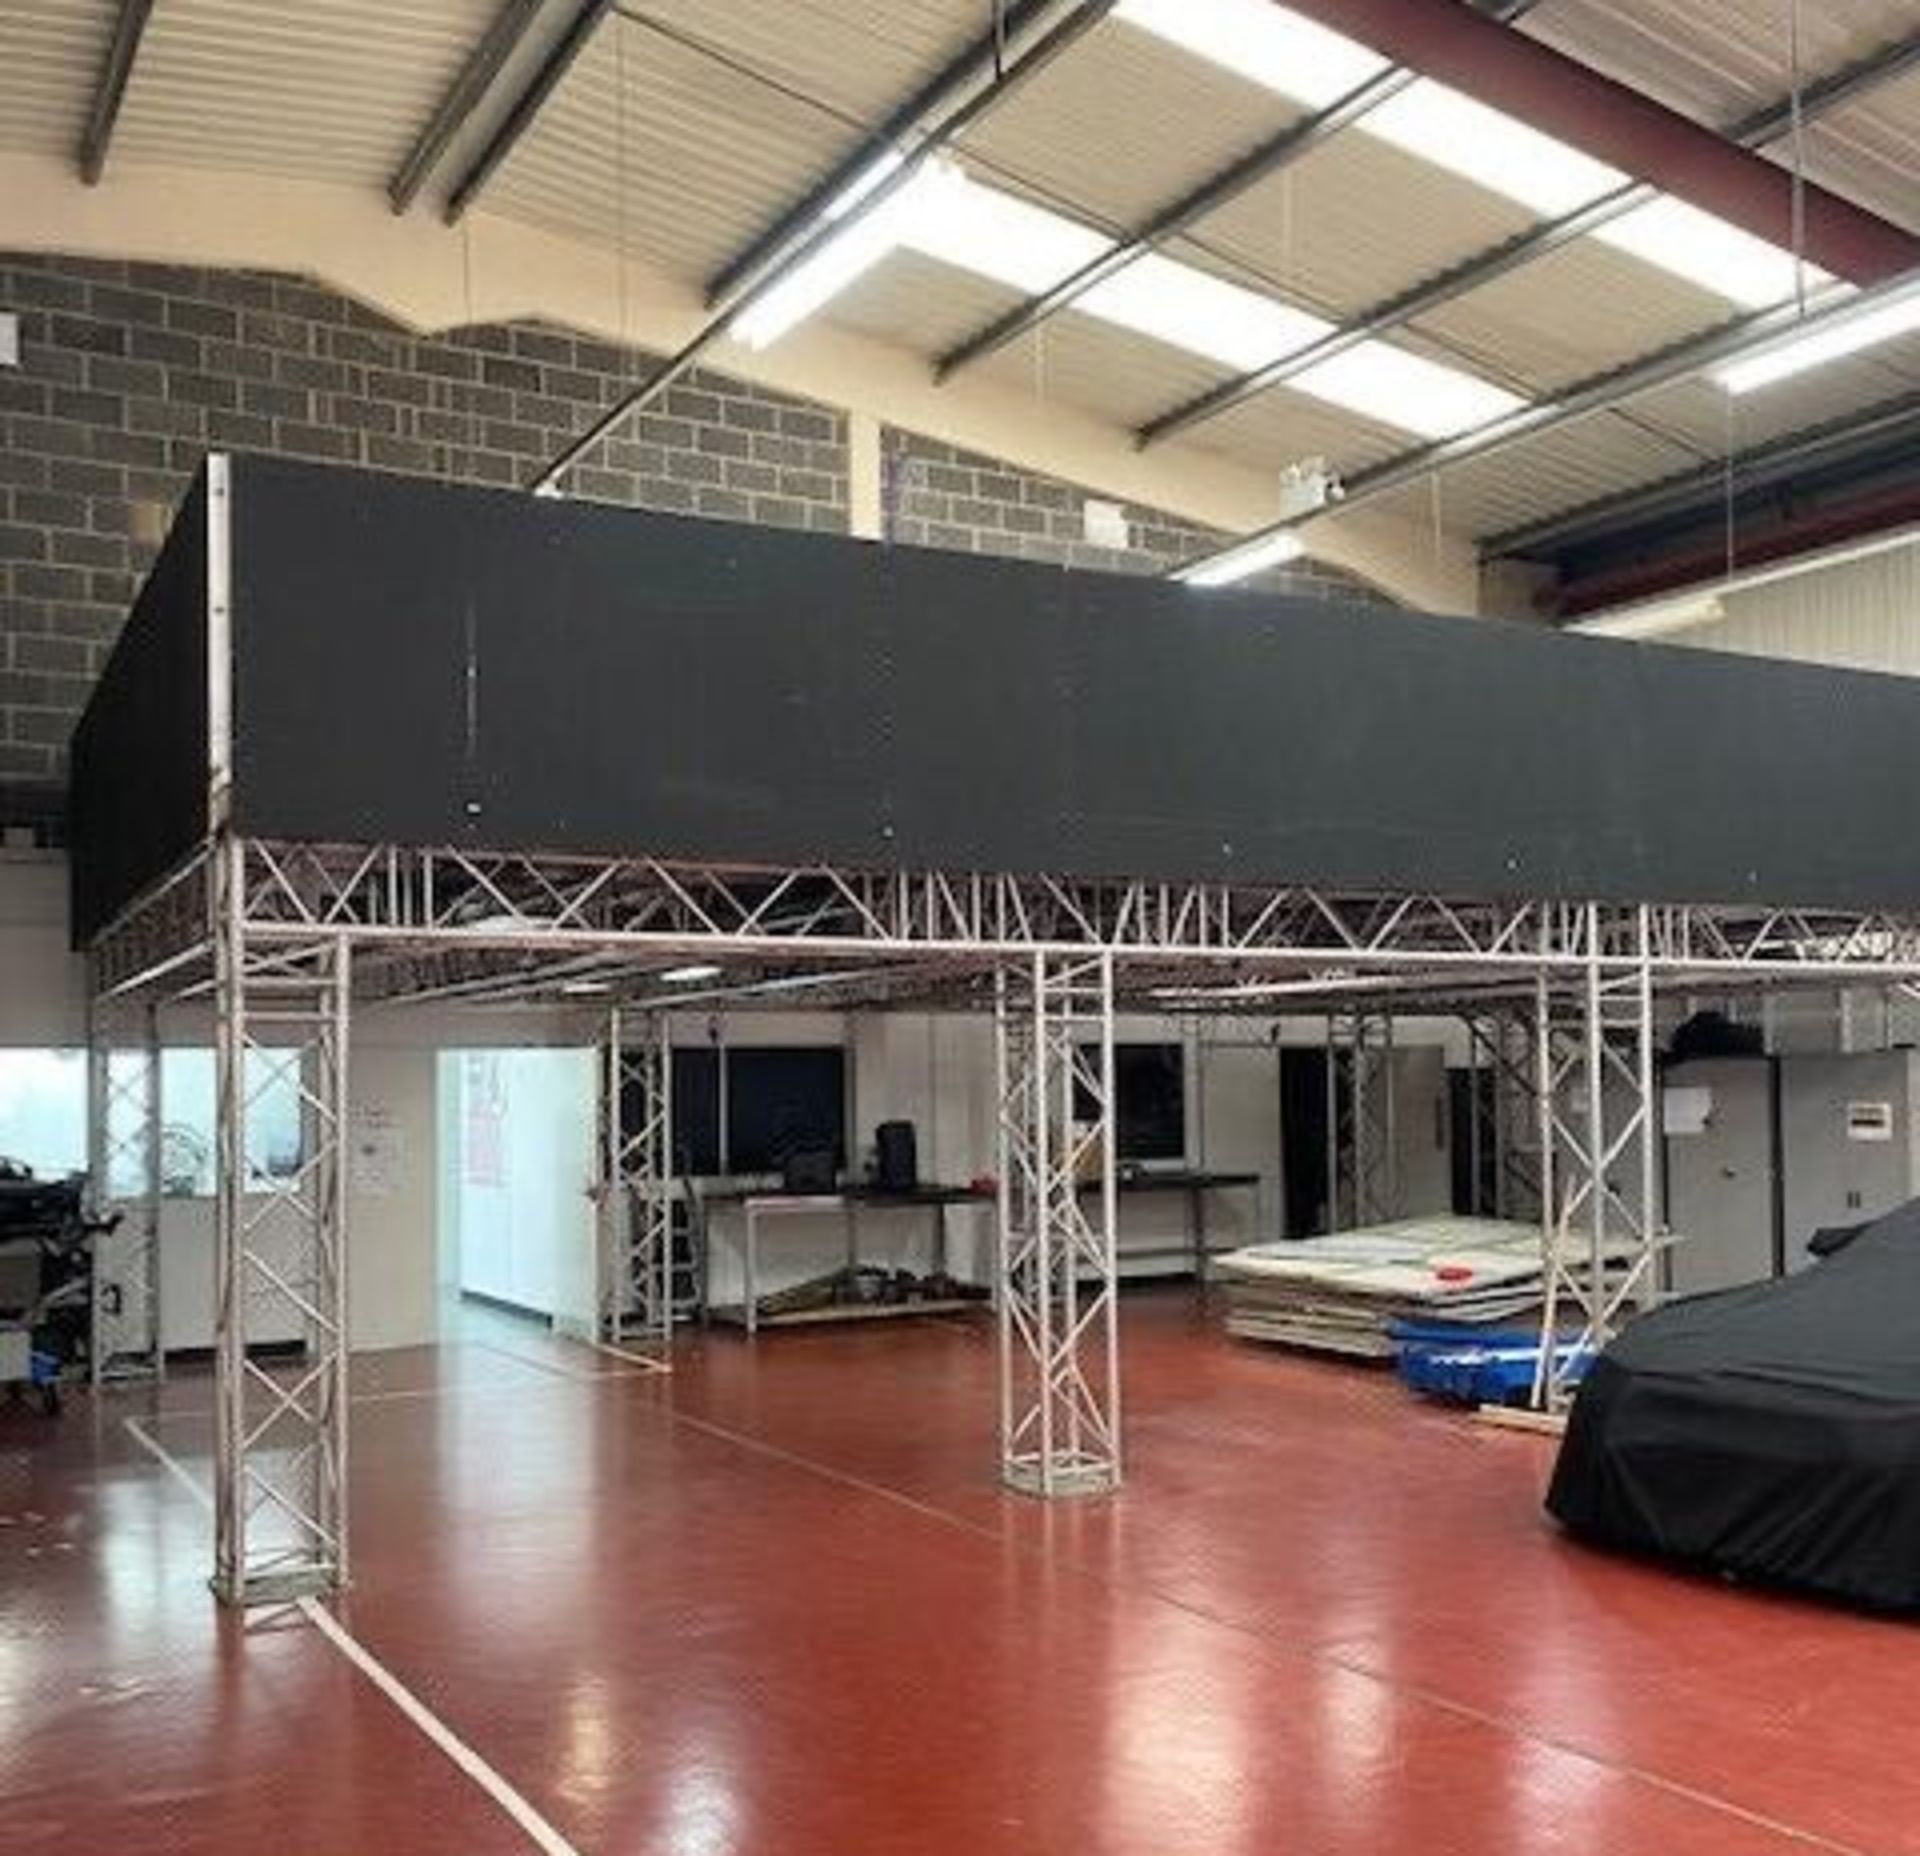 1 x 8m x 10m Truss Mezzanine with Staircase, Solid Floor And Ballustrade- CL548 - Location: Near